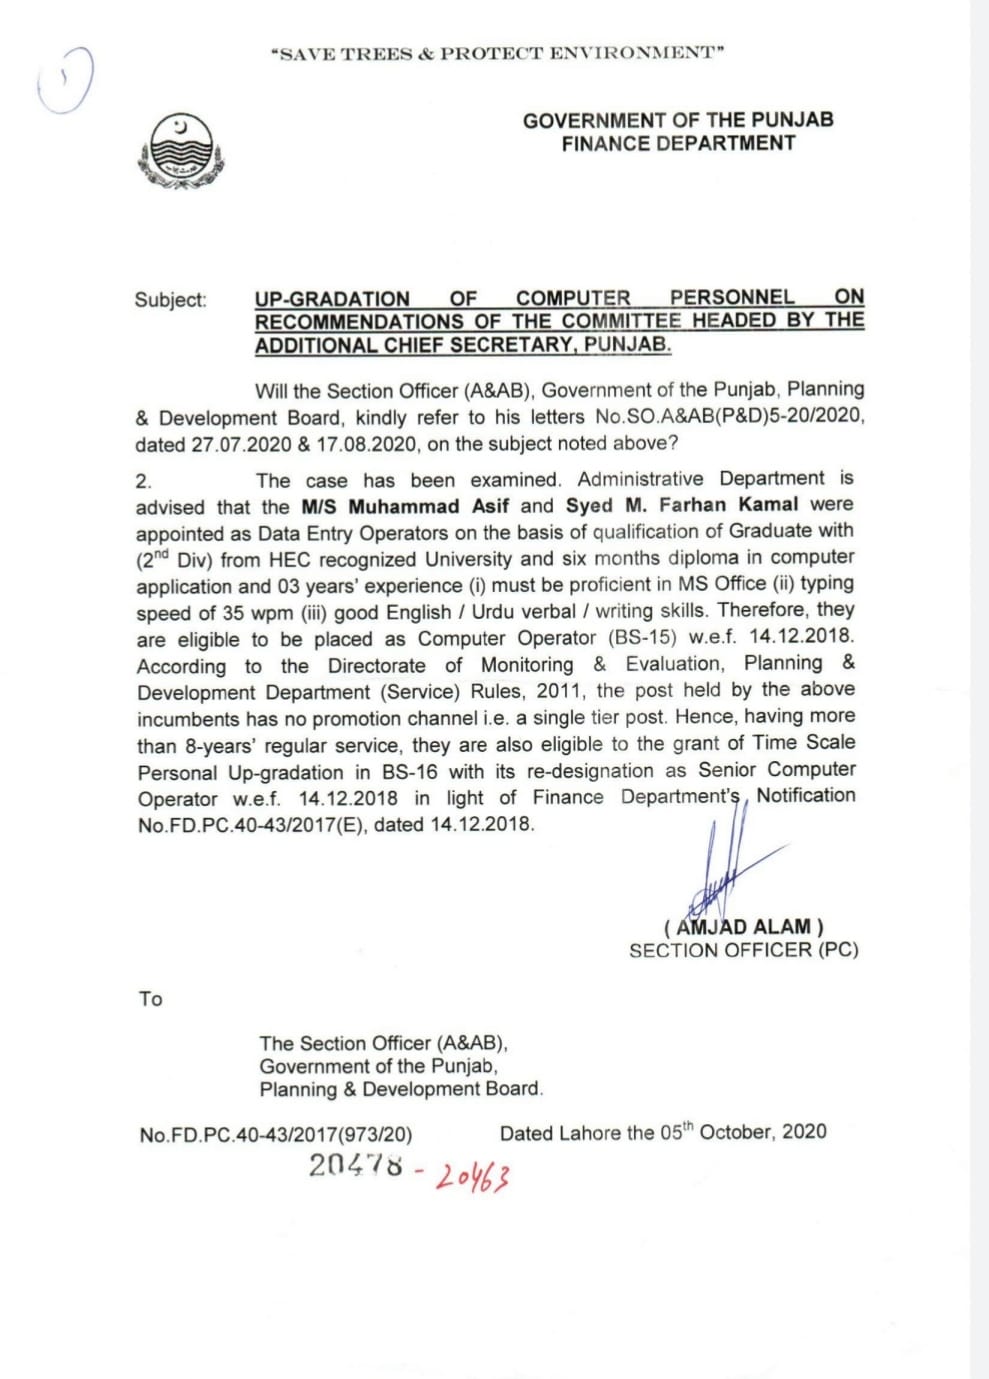 Up-gradation of Computer Personnel on Recommendations of the Committee